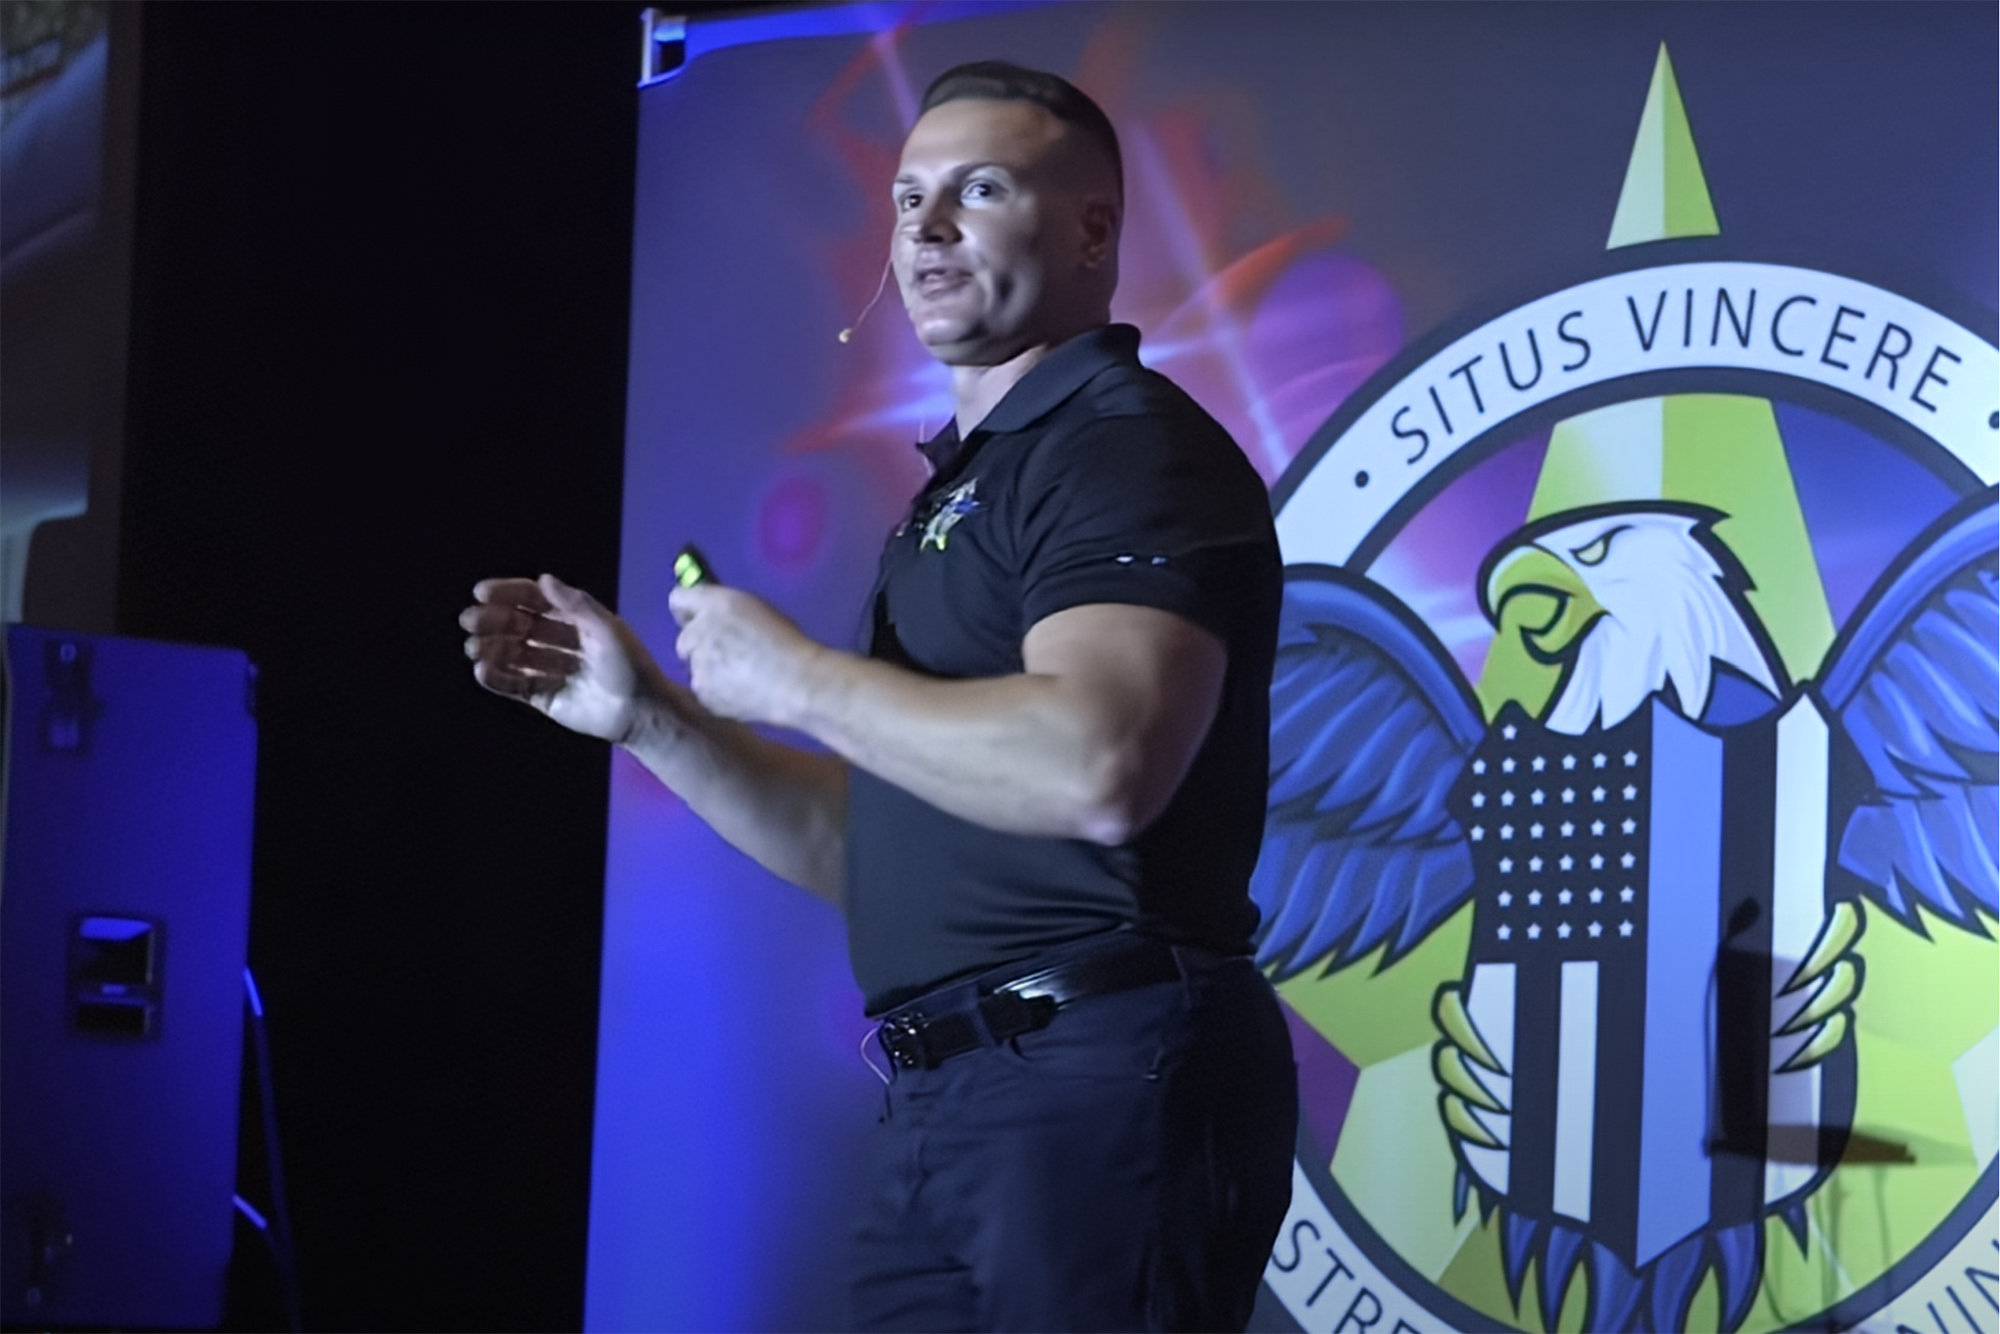 Street Cop Training founder and CEO Dennis Benigno speaks at a 2021 conference where, New Jersey's state comptroller says, police were encouraged to think of civilians as the enemy and to pull people over on hunches.